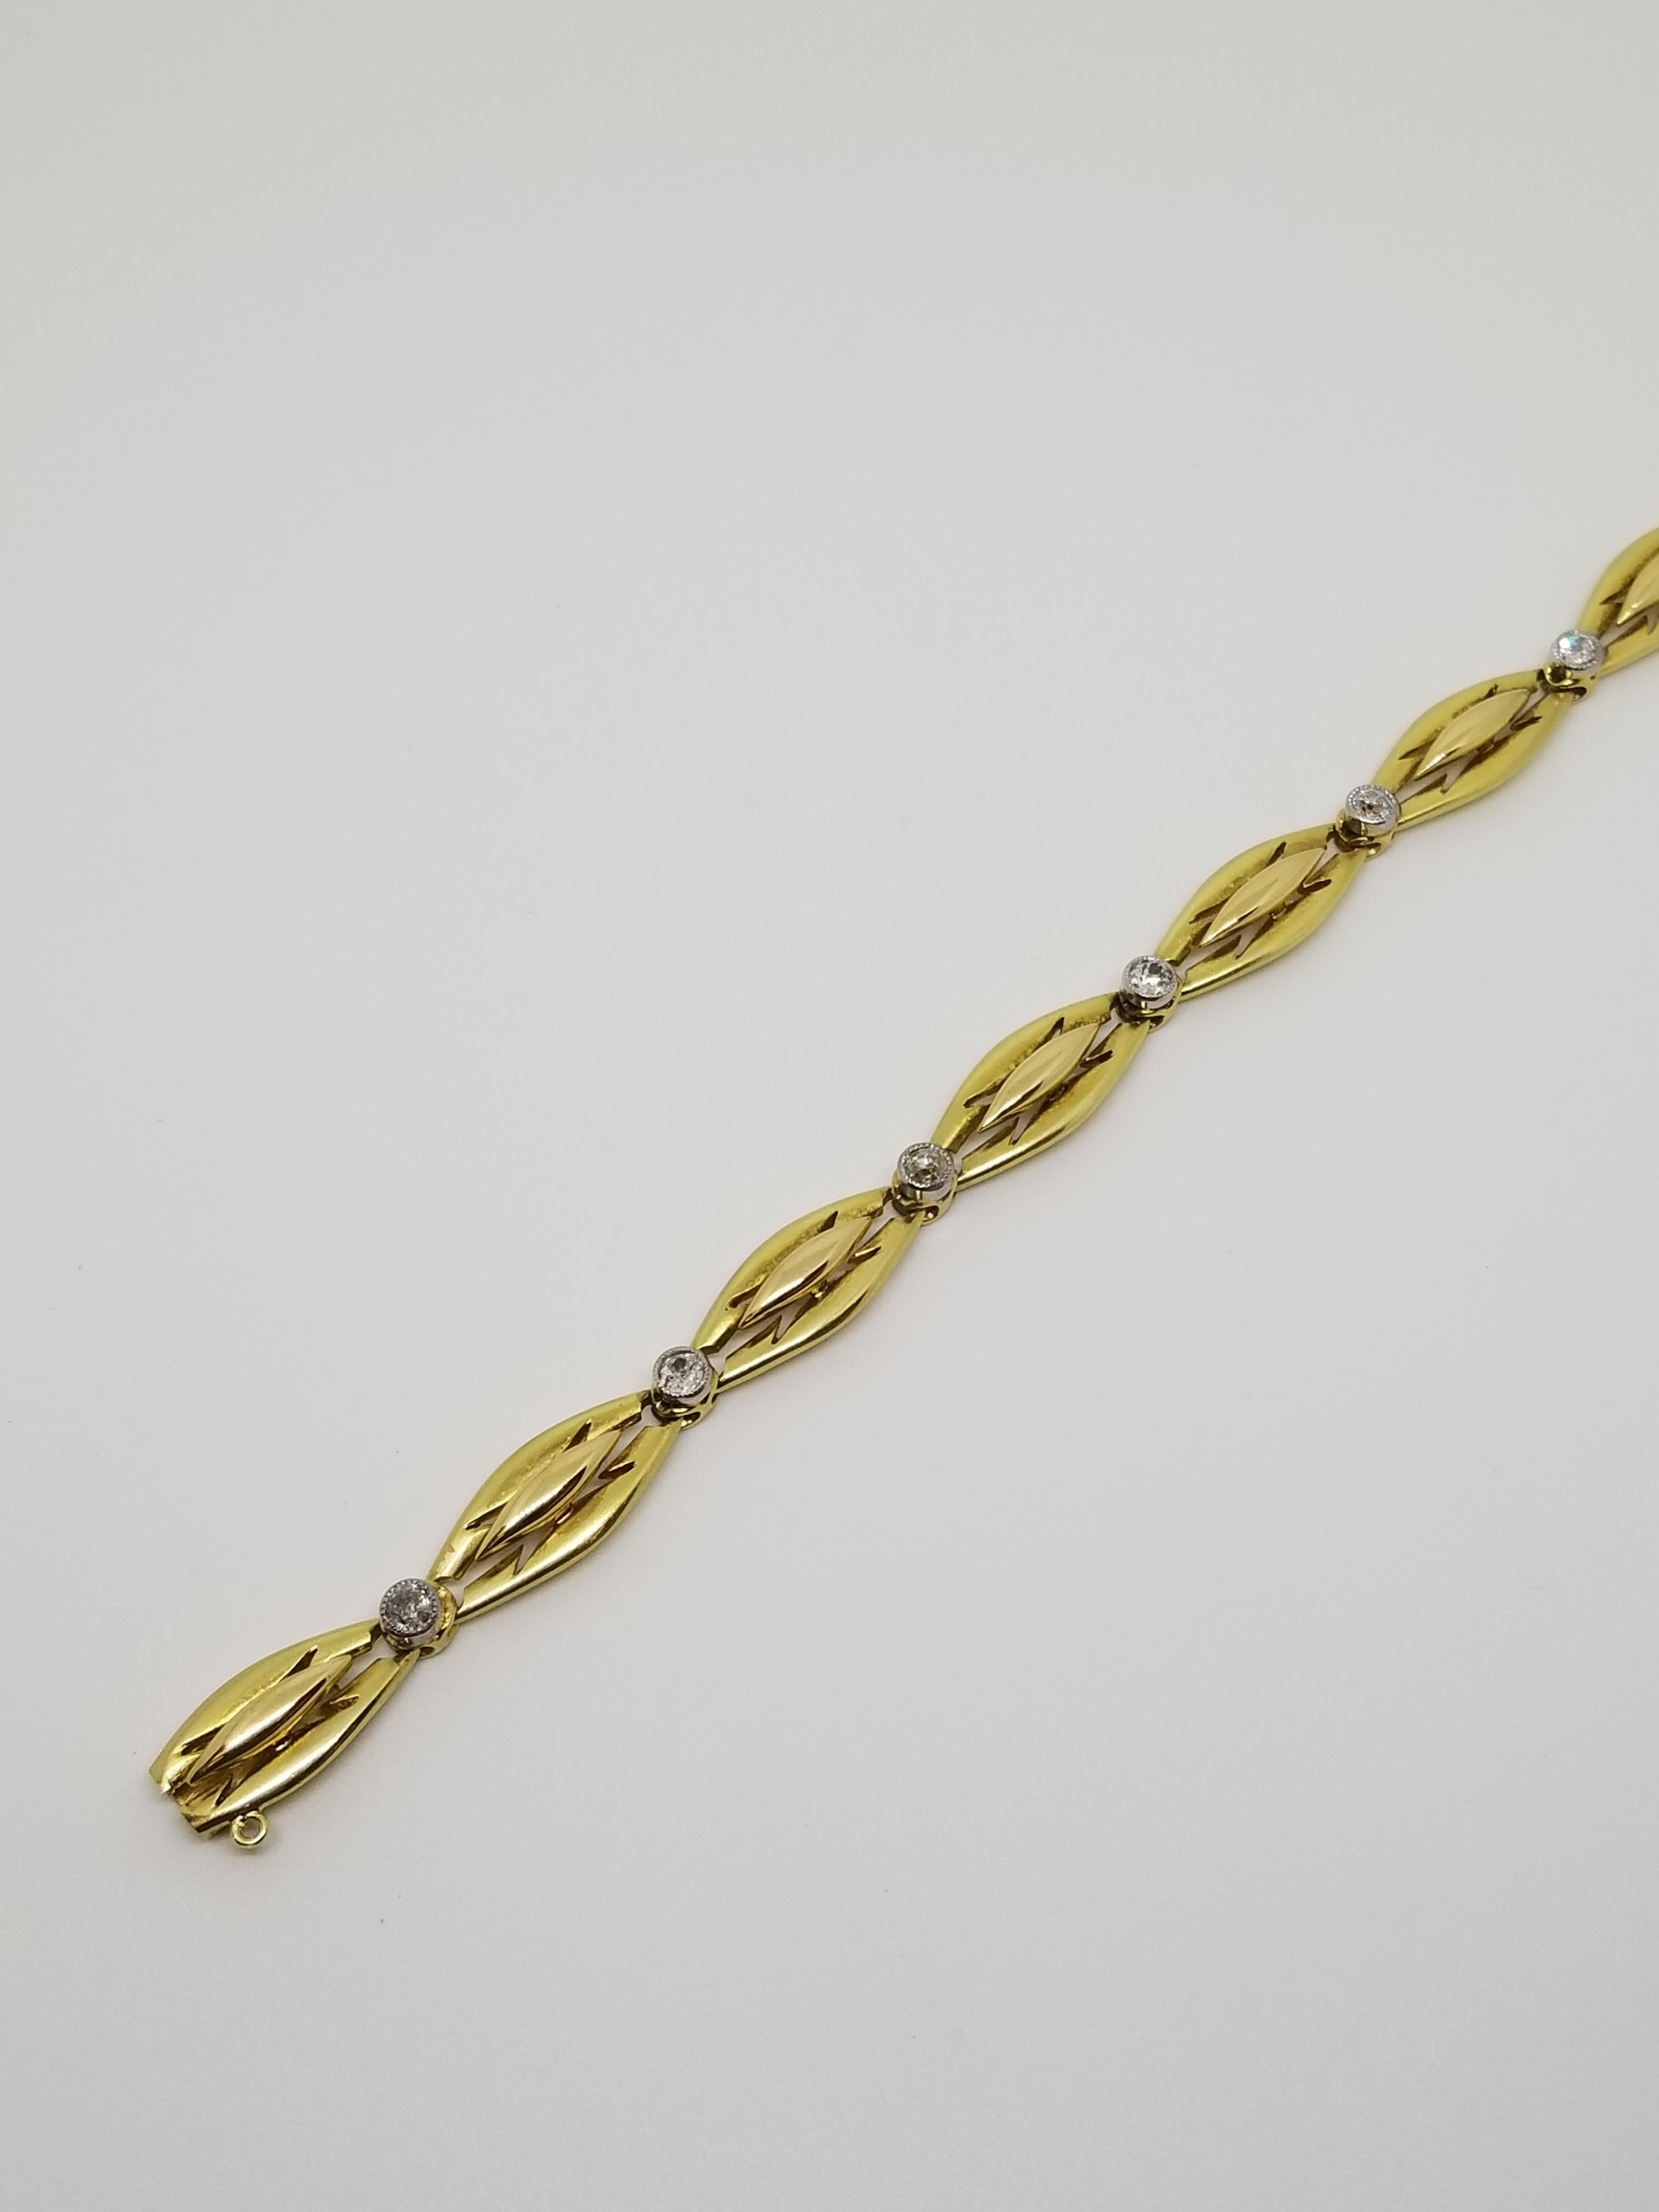 An 18 karat yellow gold circle of stylized organic leaf motifs alternating with bezel set shimmering round single cut diamonds, makes this Art Deco French bracelet a one-of-a-kind collectible.  7 1/2